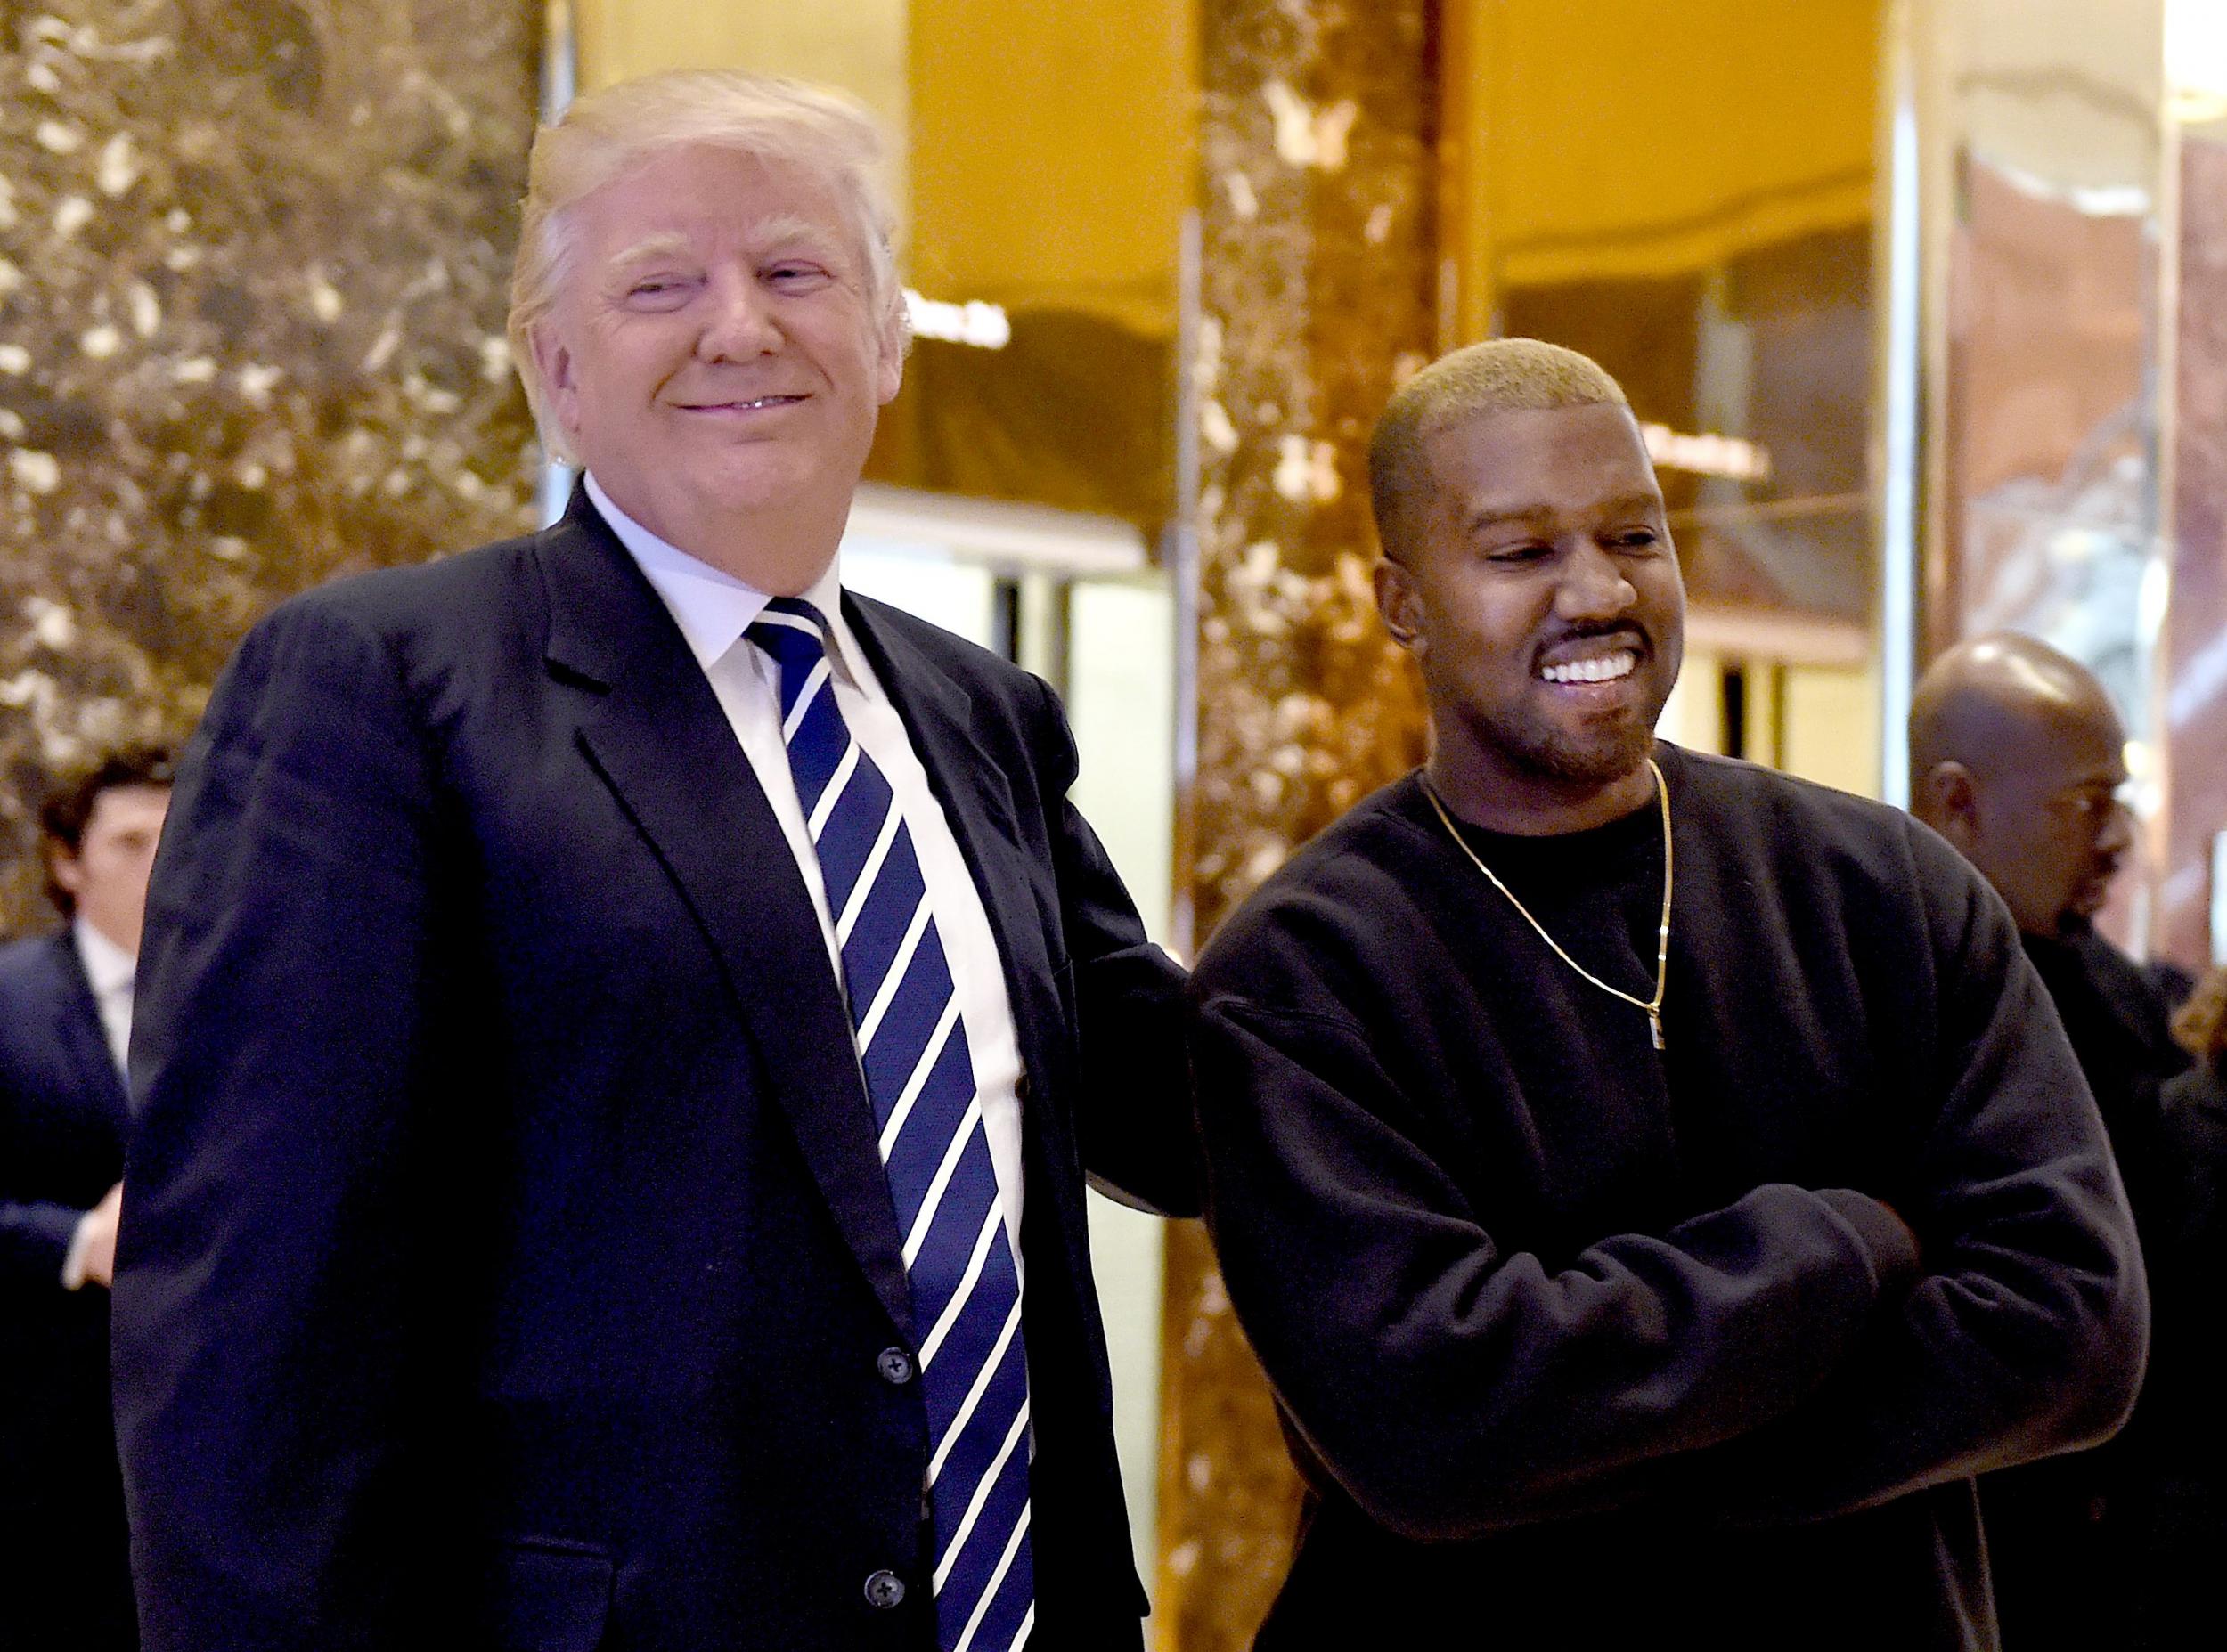 Singer Kanye West and President Donald Trump at Trump Tower, 13 December 2016, New York (TIMOTHY A. CLARY/AFP/Getty Images)